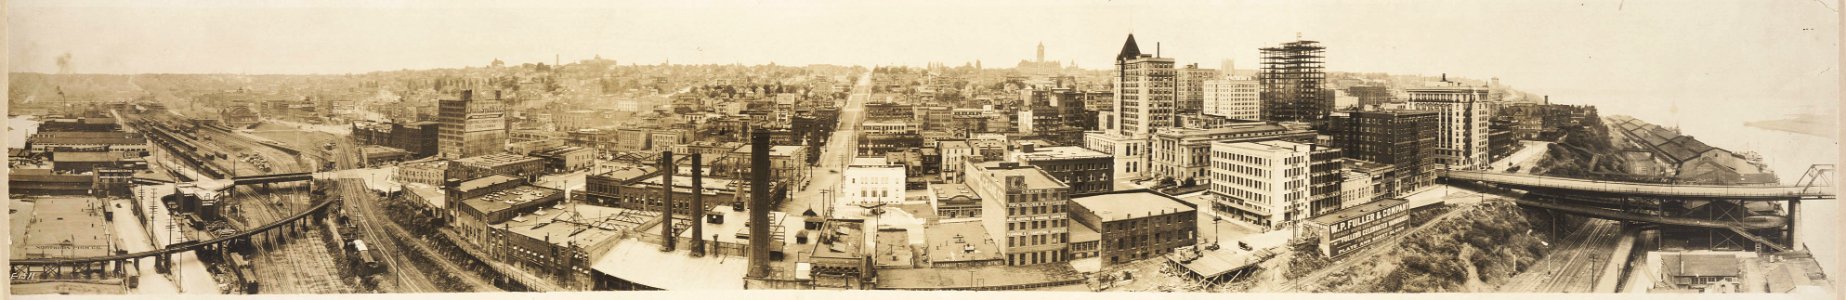 1922 Panoramic view of Tacoma WA looking west photo